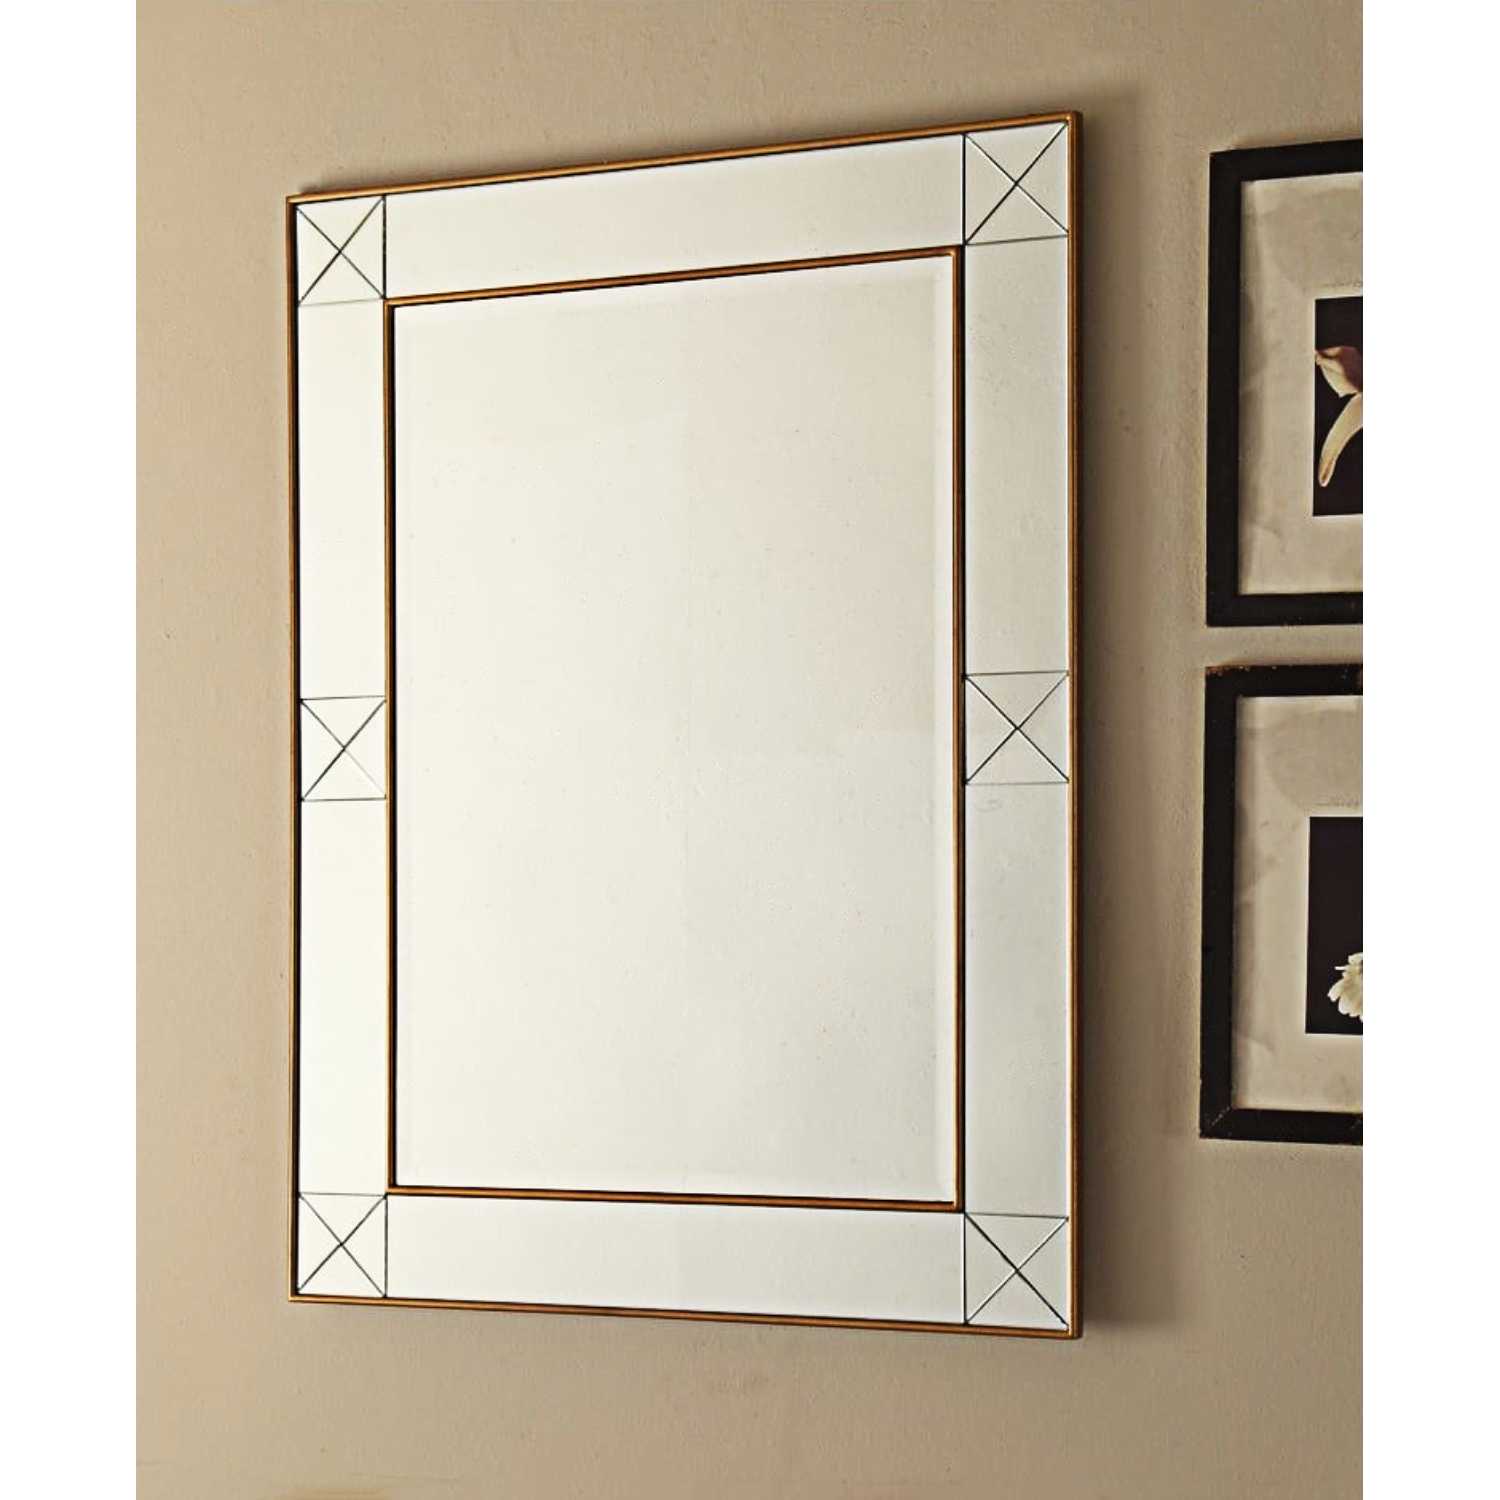 Imperial Large Mirrored Glass Rectangular Wall Mirror With Gold Trim